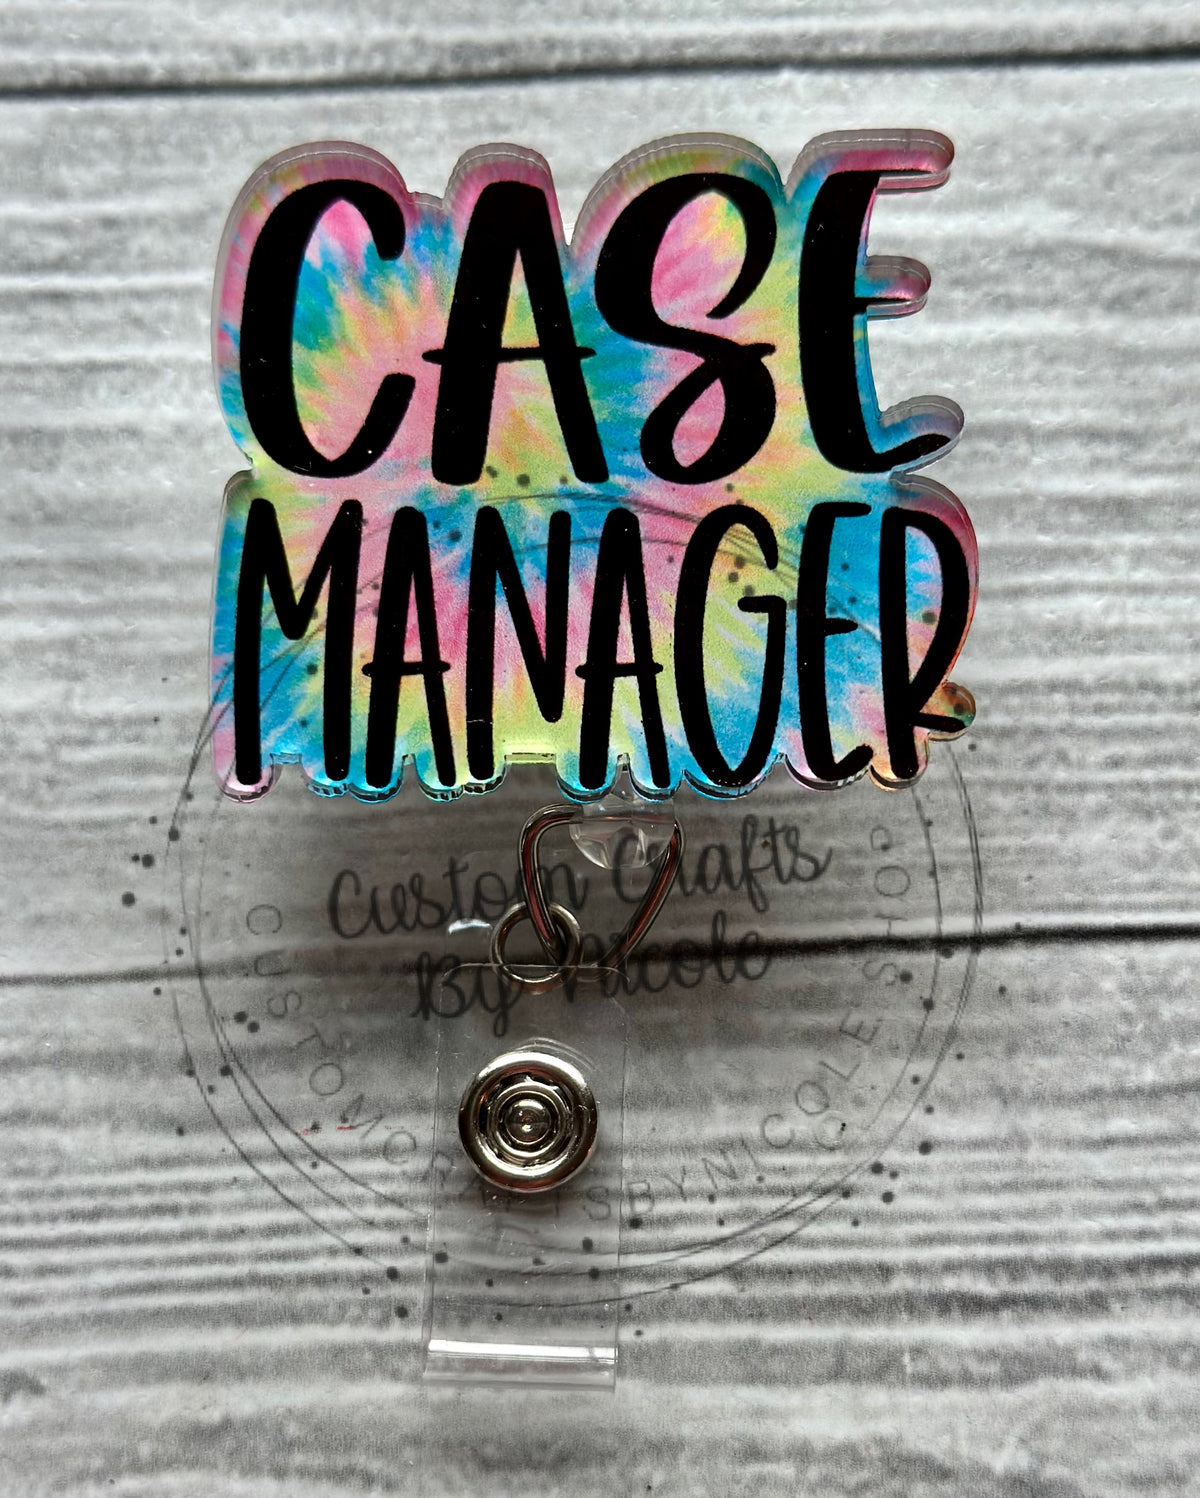 Case manager